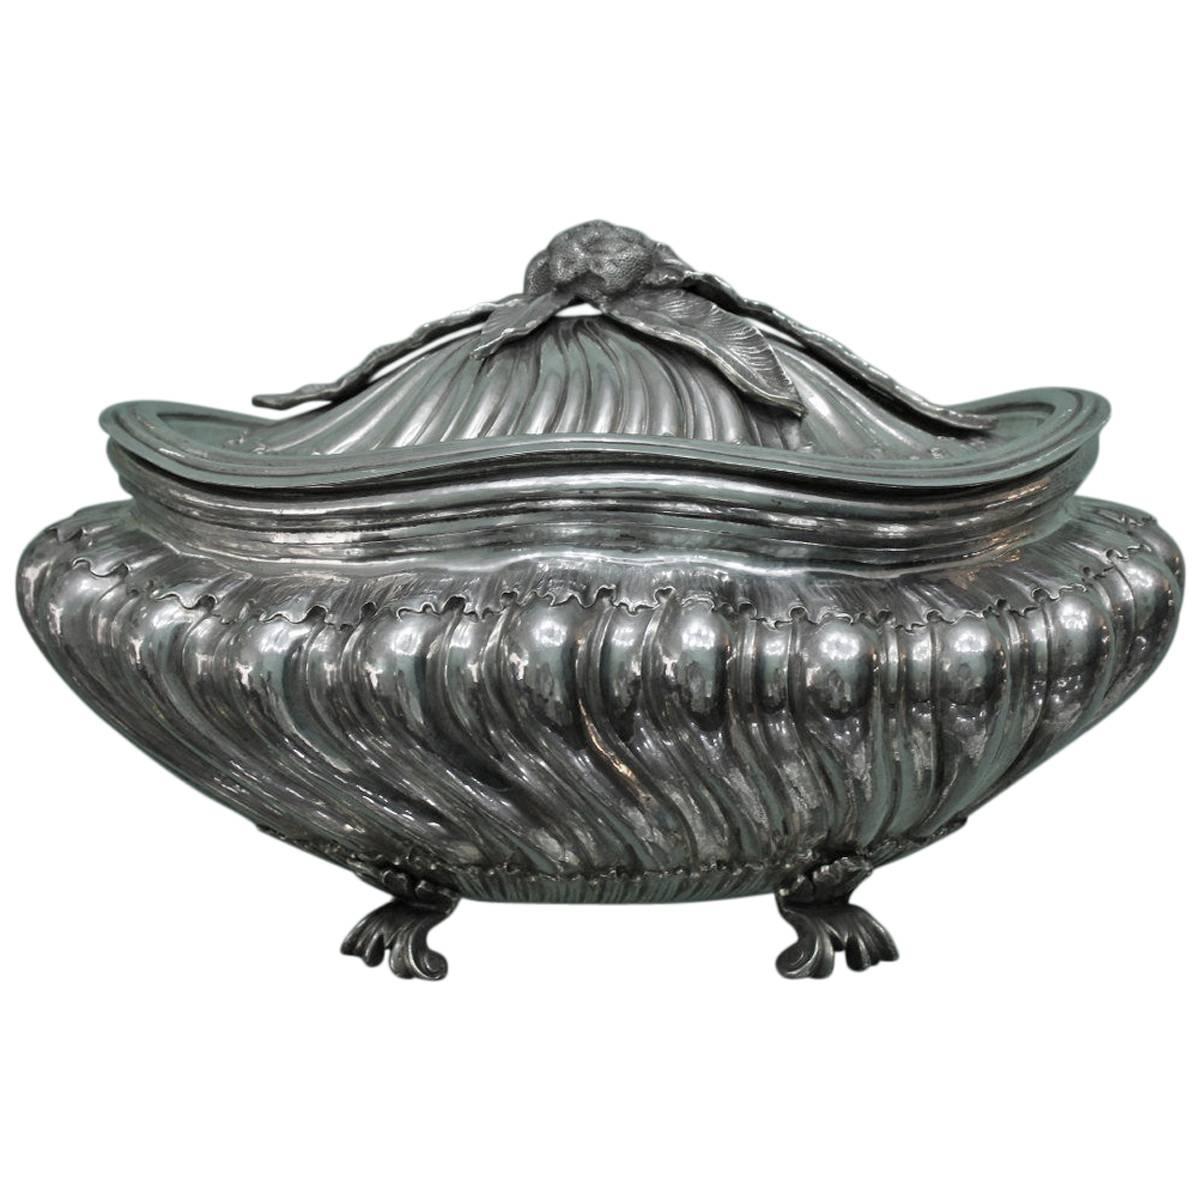 Mario Buccellati Silver Soup Tureen Early 20th Century For Sale